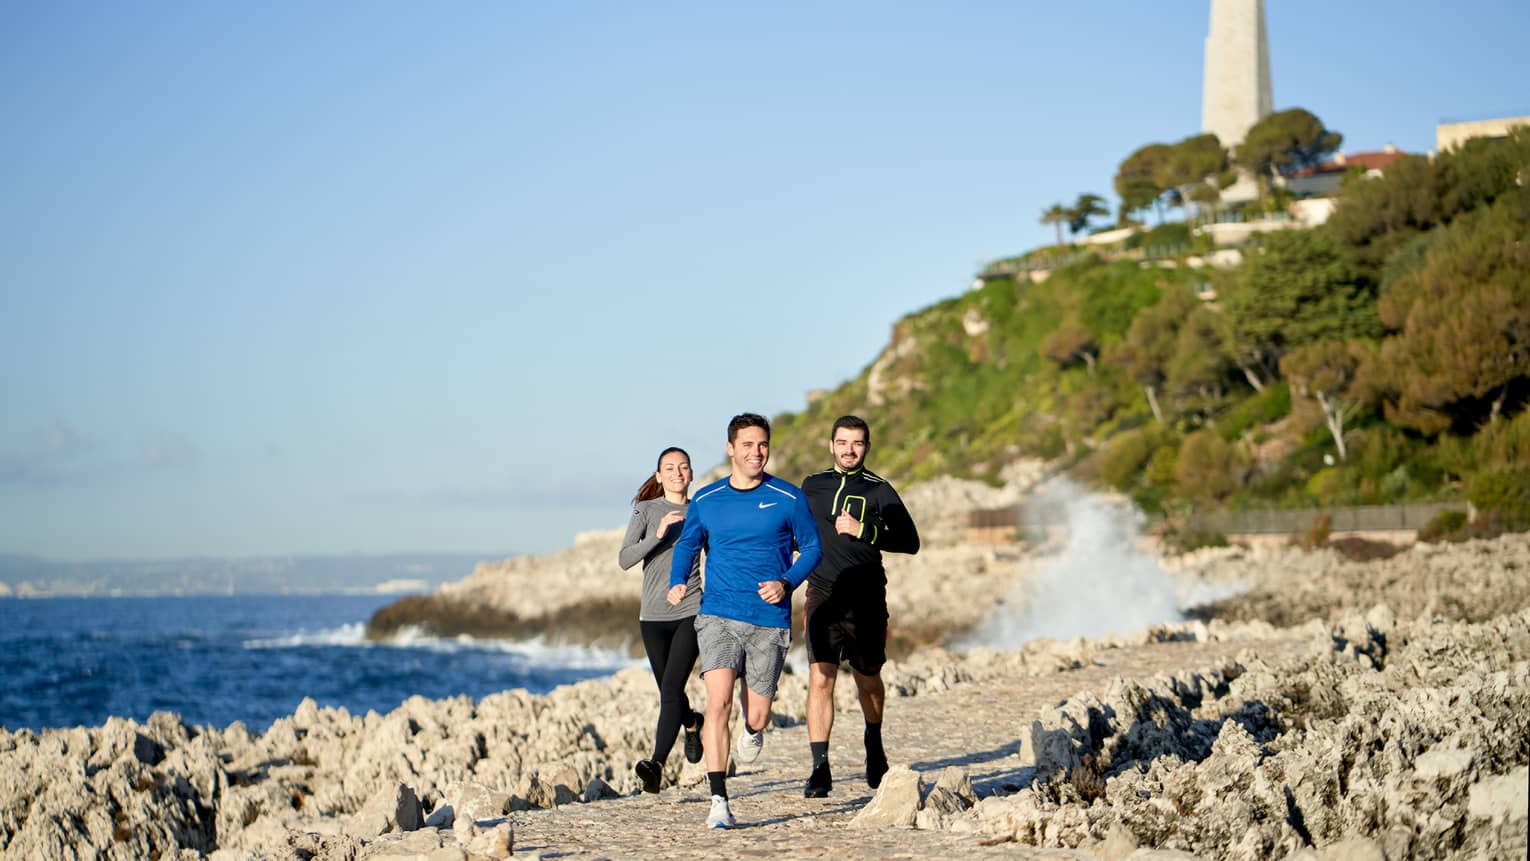 Three people jogging, smiling, on rocky trail beside the sea, lighthouse in backdrop